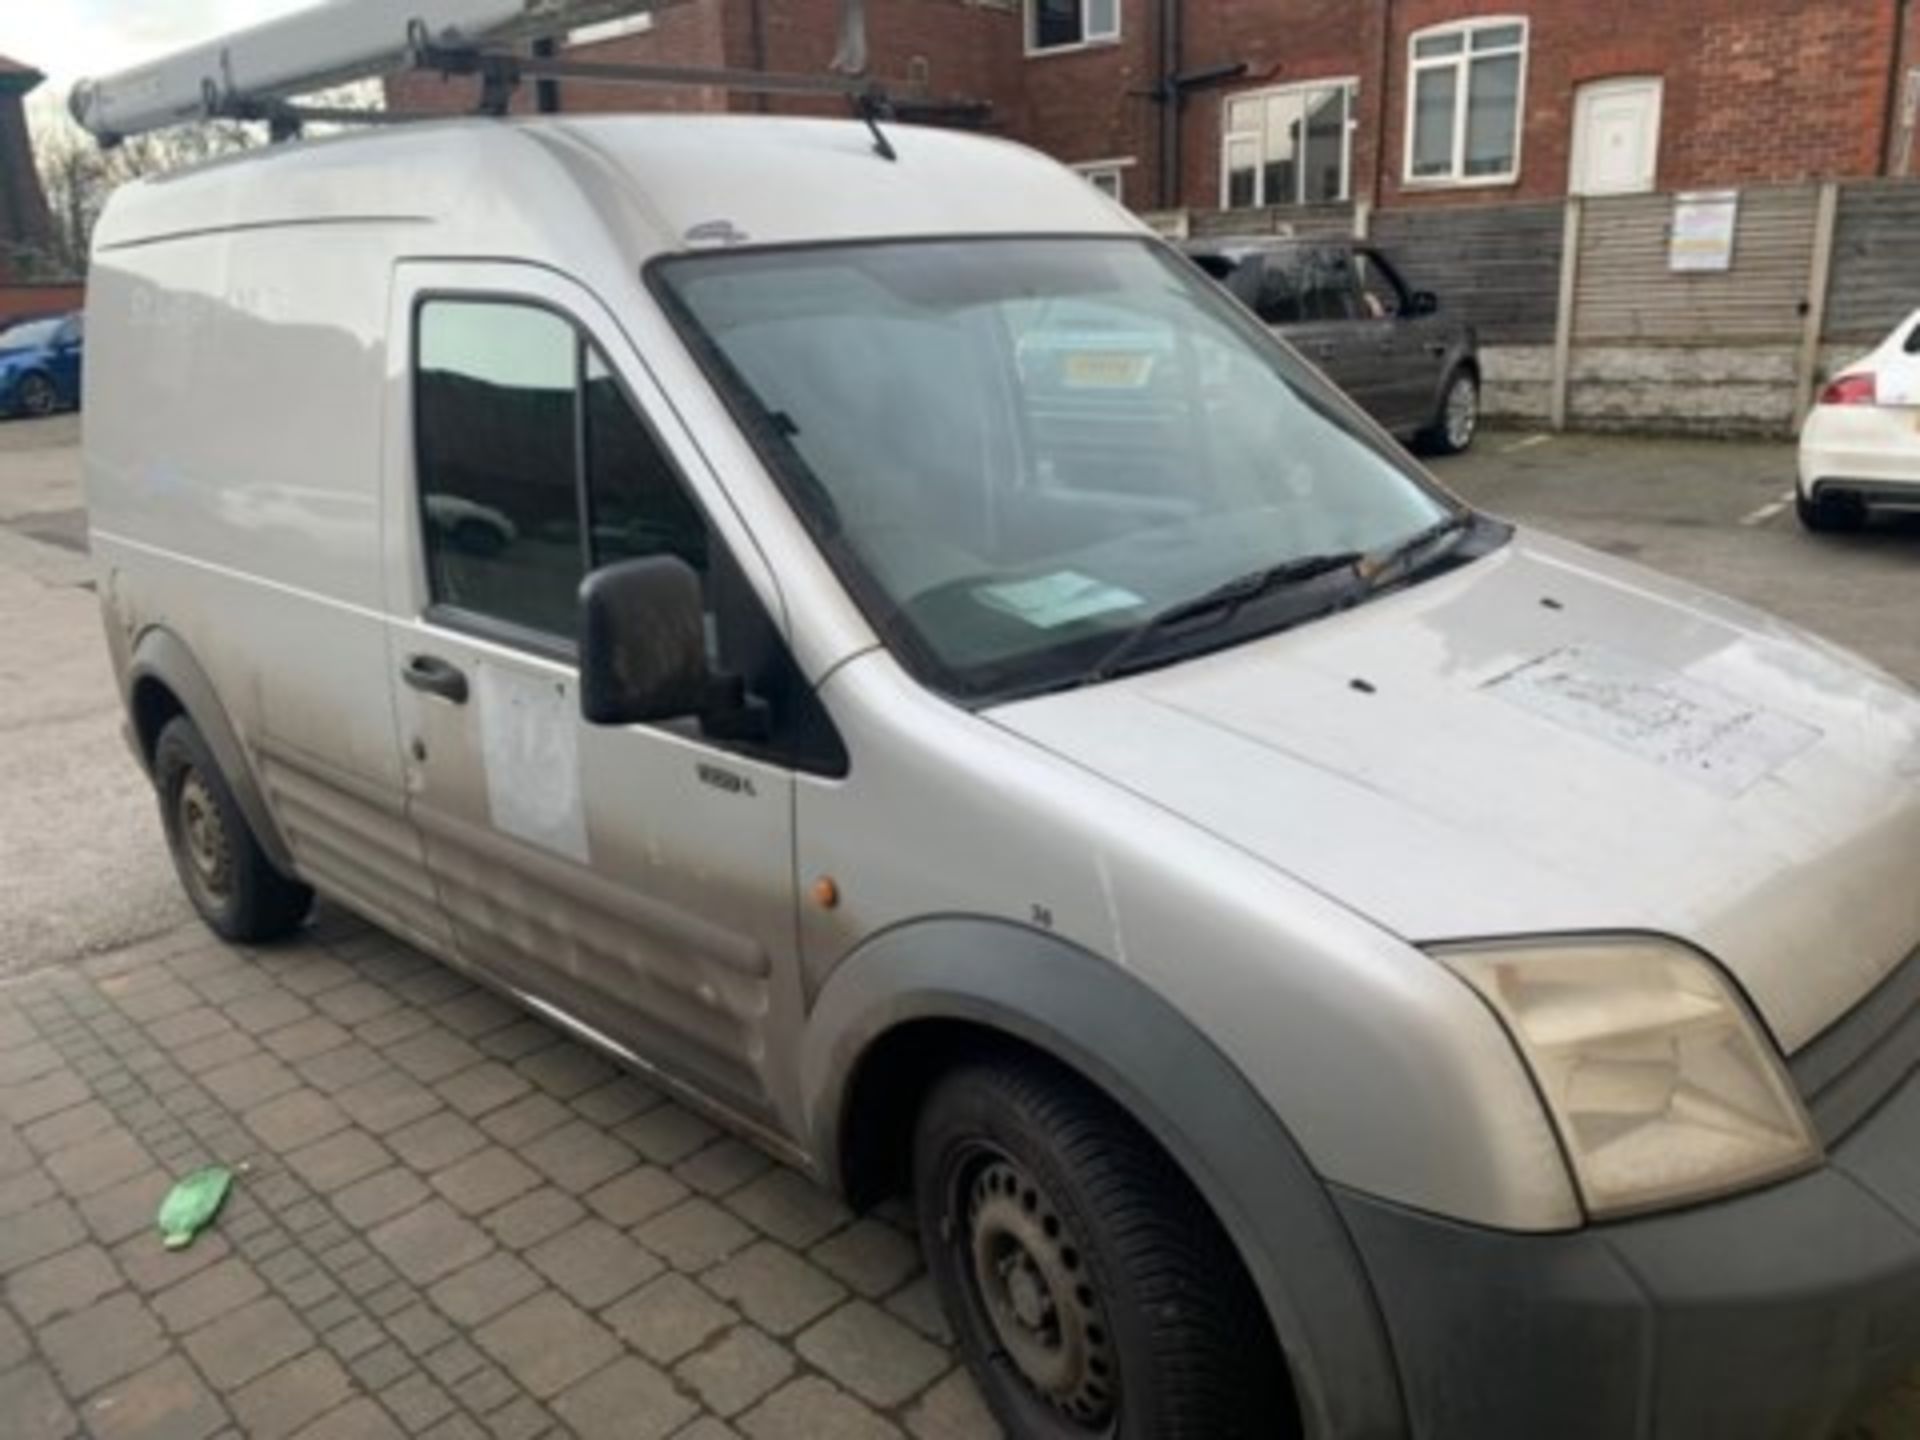 Ford Connect Van